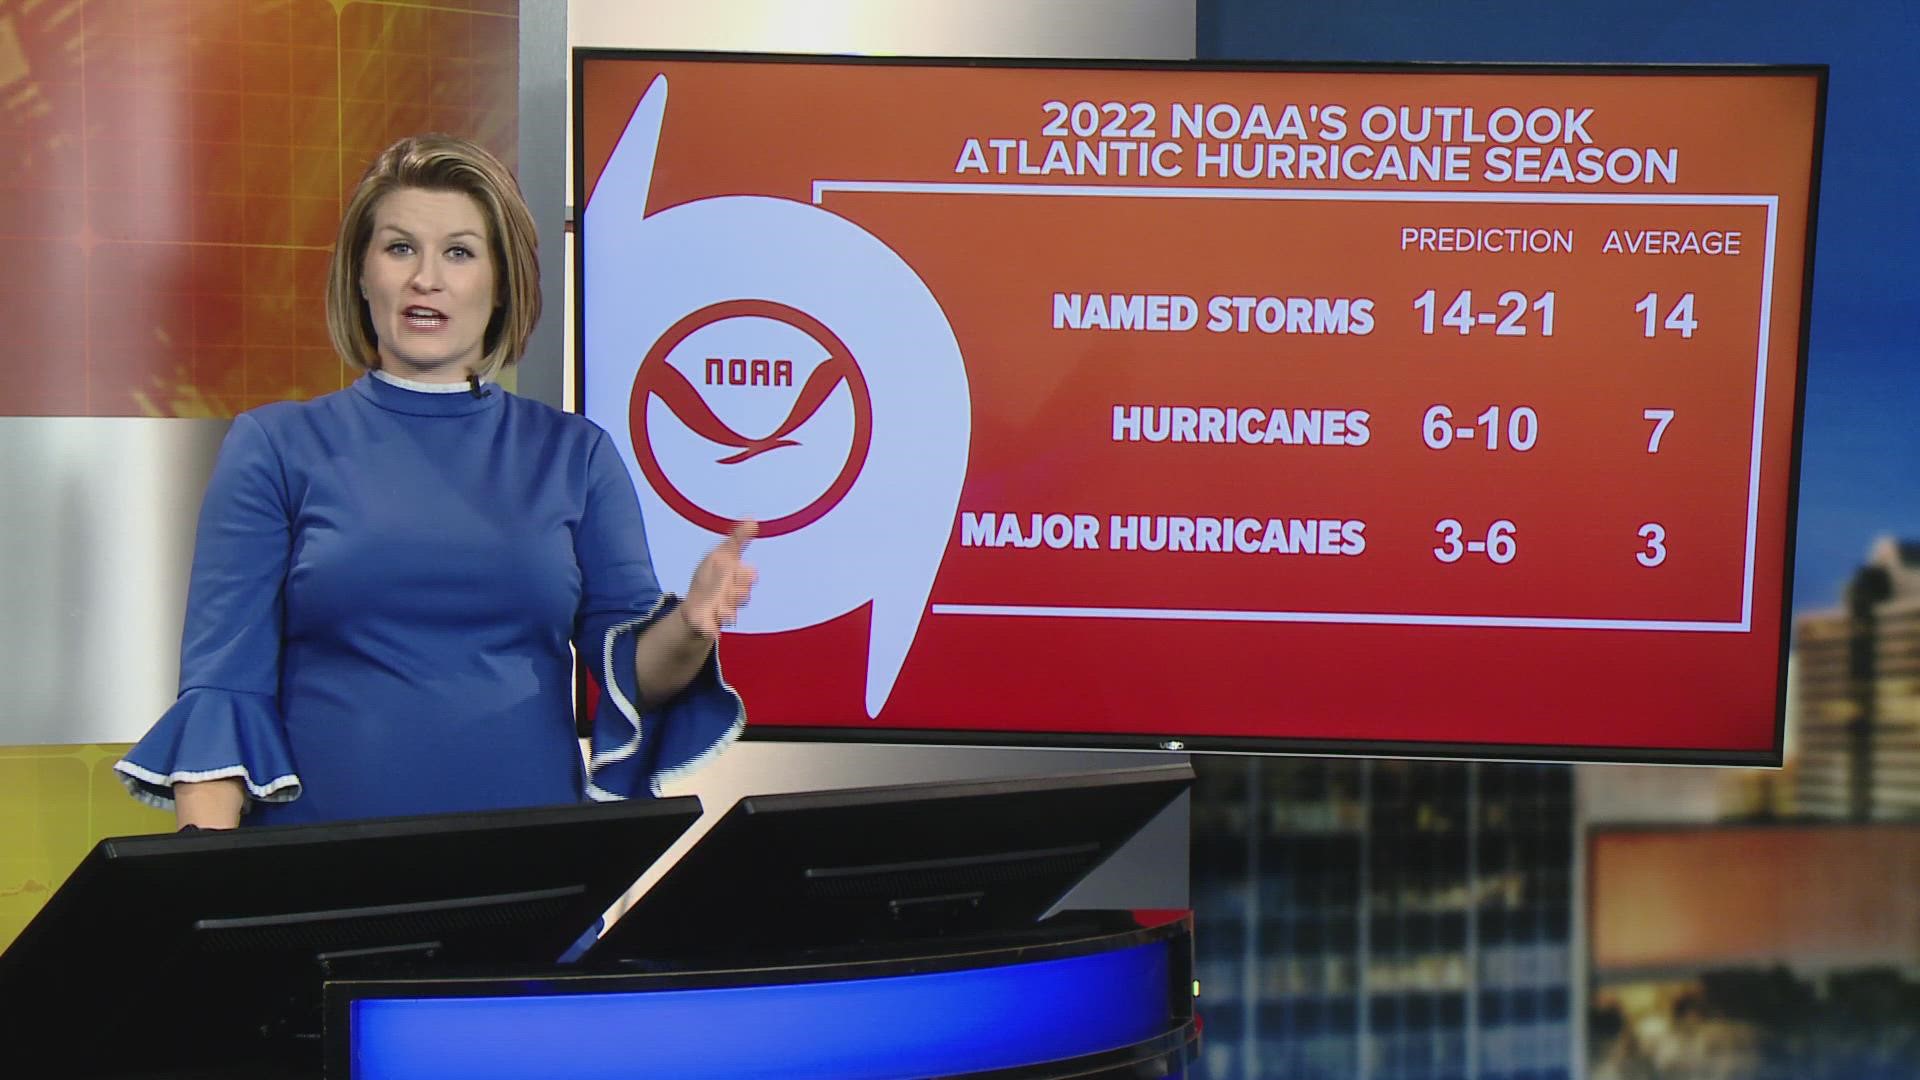 NOAA forecasts 14-21 named storms with winds of at least 39 mph, or tropical storm strength, this season. This is above the average of 14 named storms.